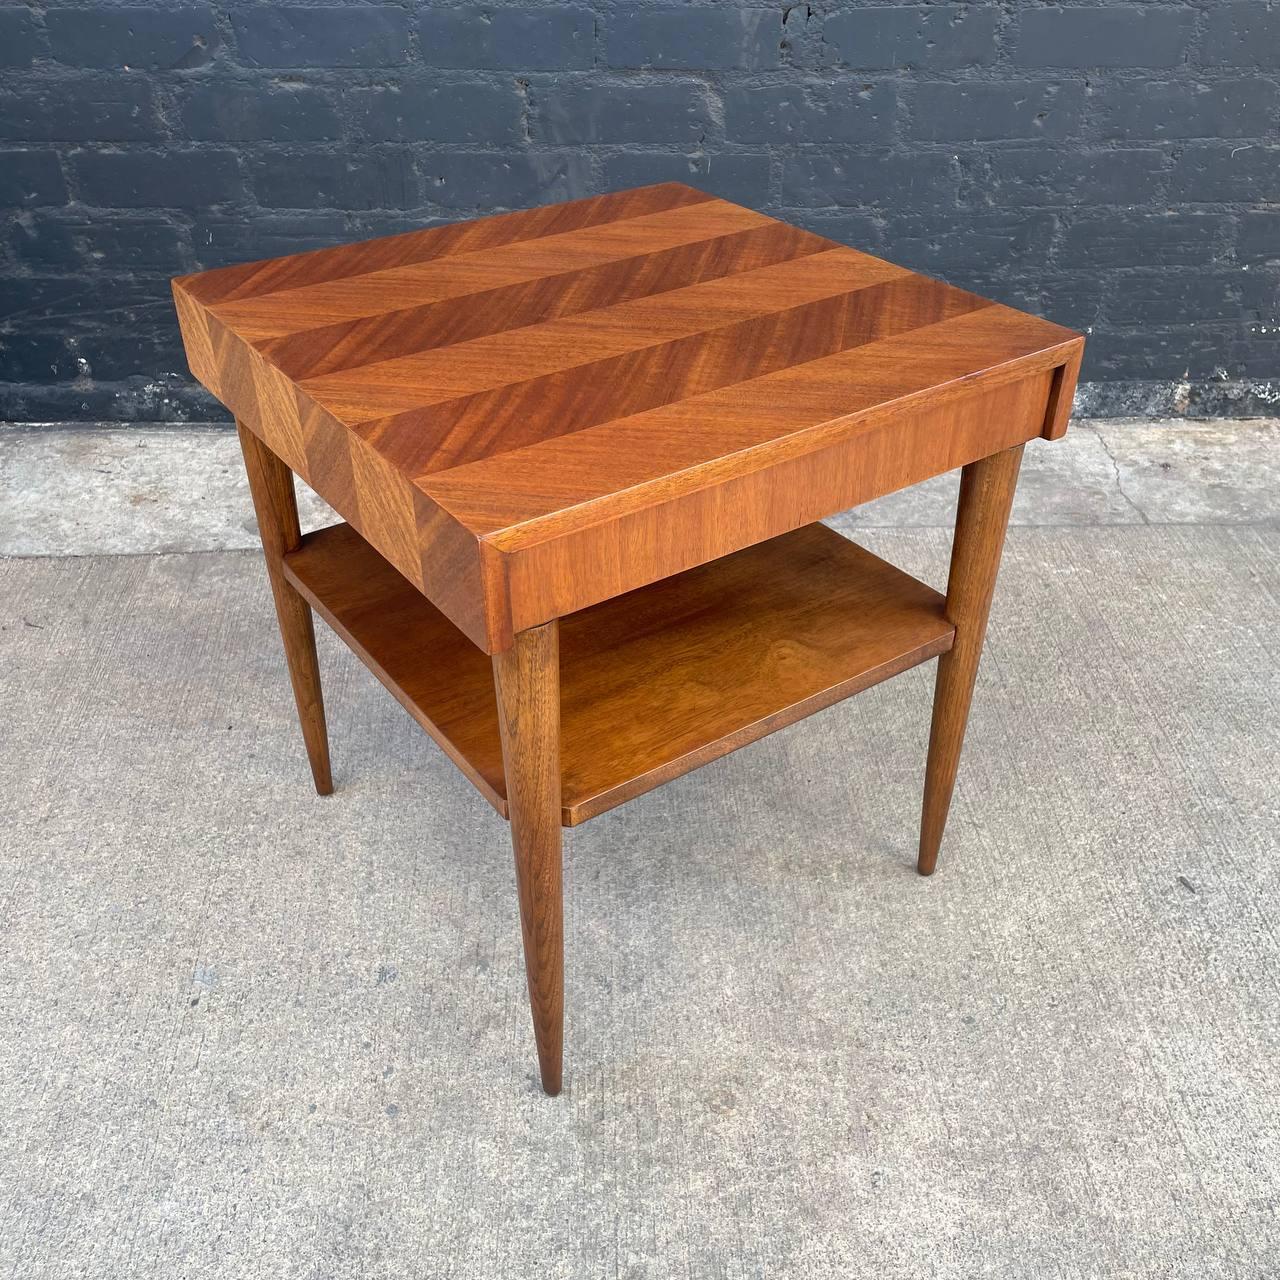 Newly Refinished - Mid-Century Modern Walnut Two-Tier Side Table by Lane

With over 15 years of experience, our workshop has followed a careful process of restoration, showcasing our passion and creativity for vintage designs that can seamlessly be